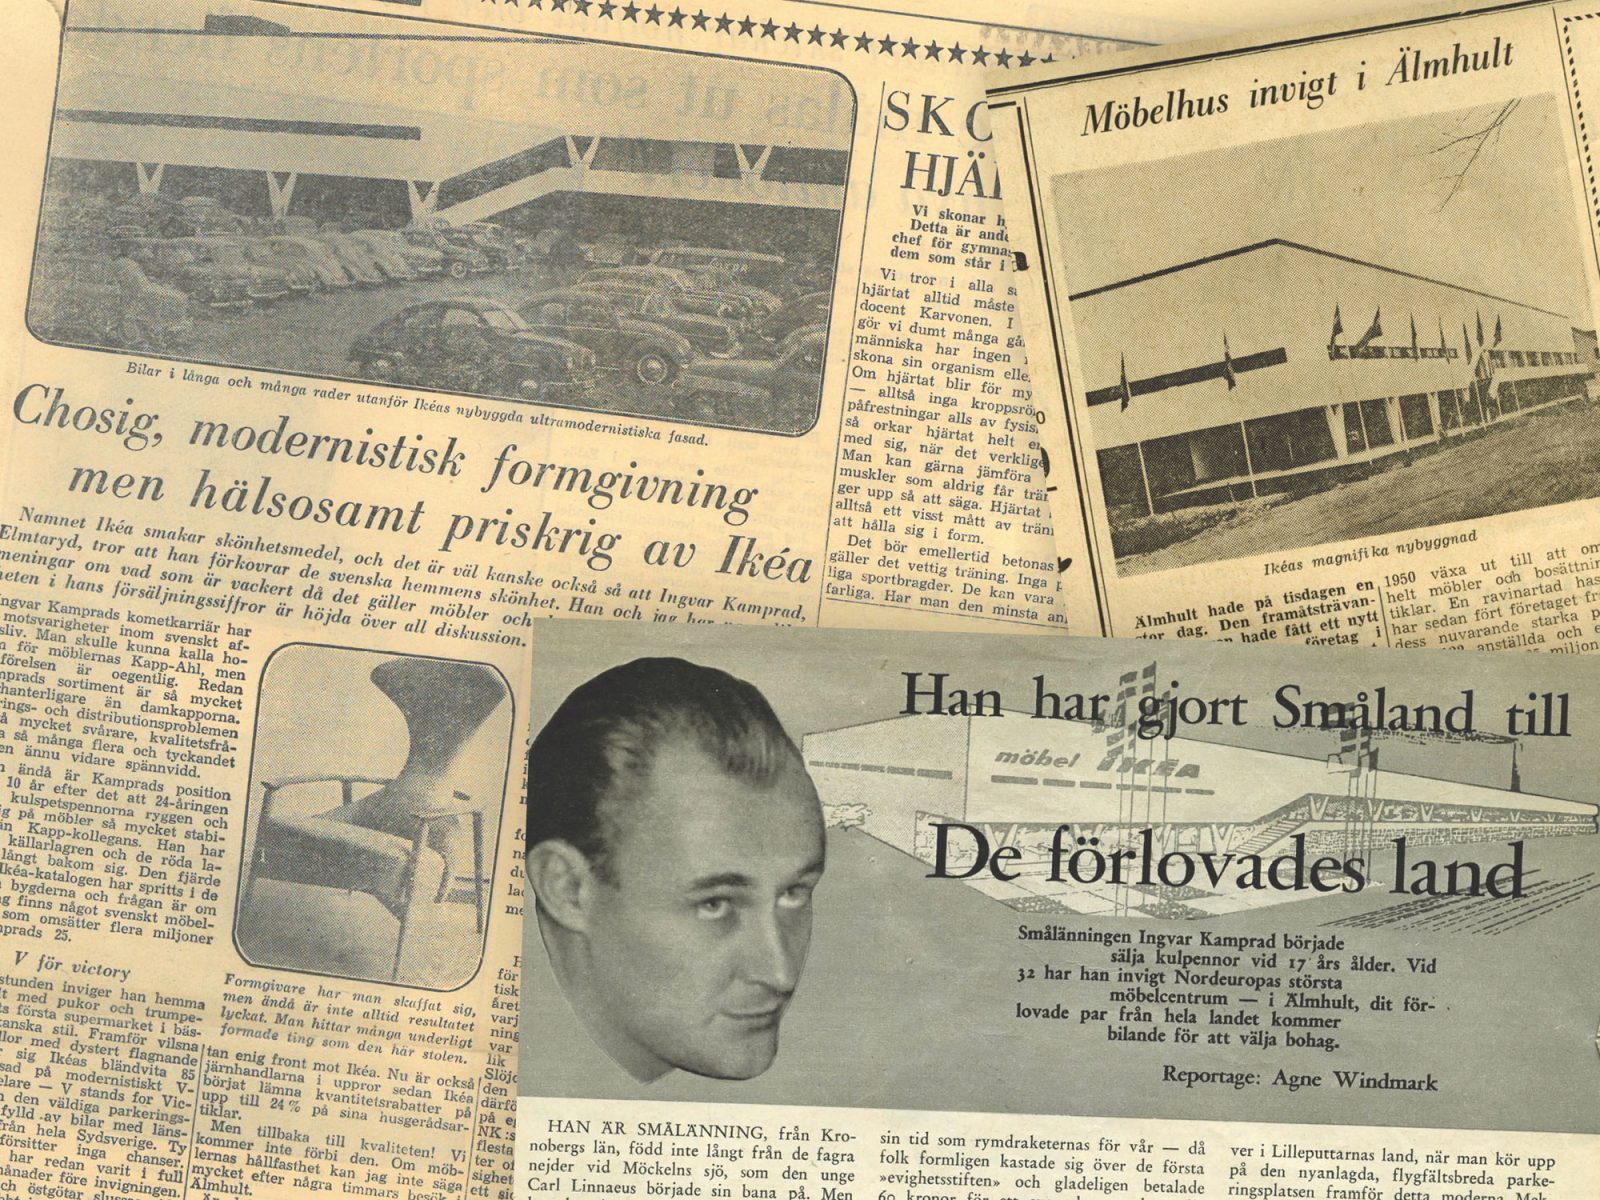 Mixed press cuttings from 1950s newspapers with articles about the opening of IKEA in Älmhult in 1958.